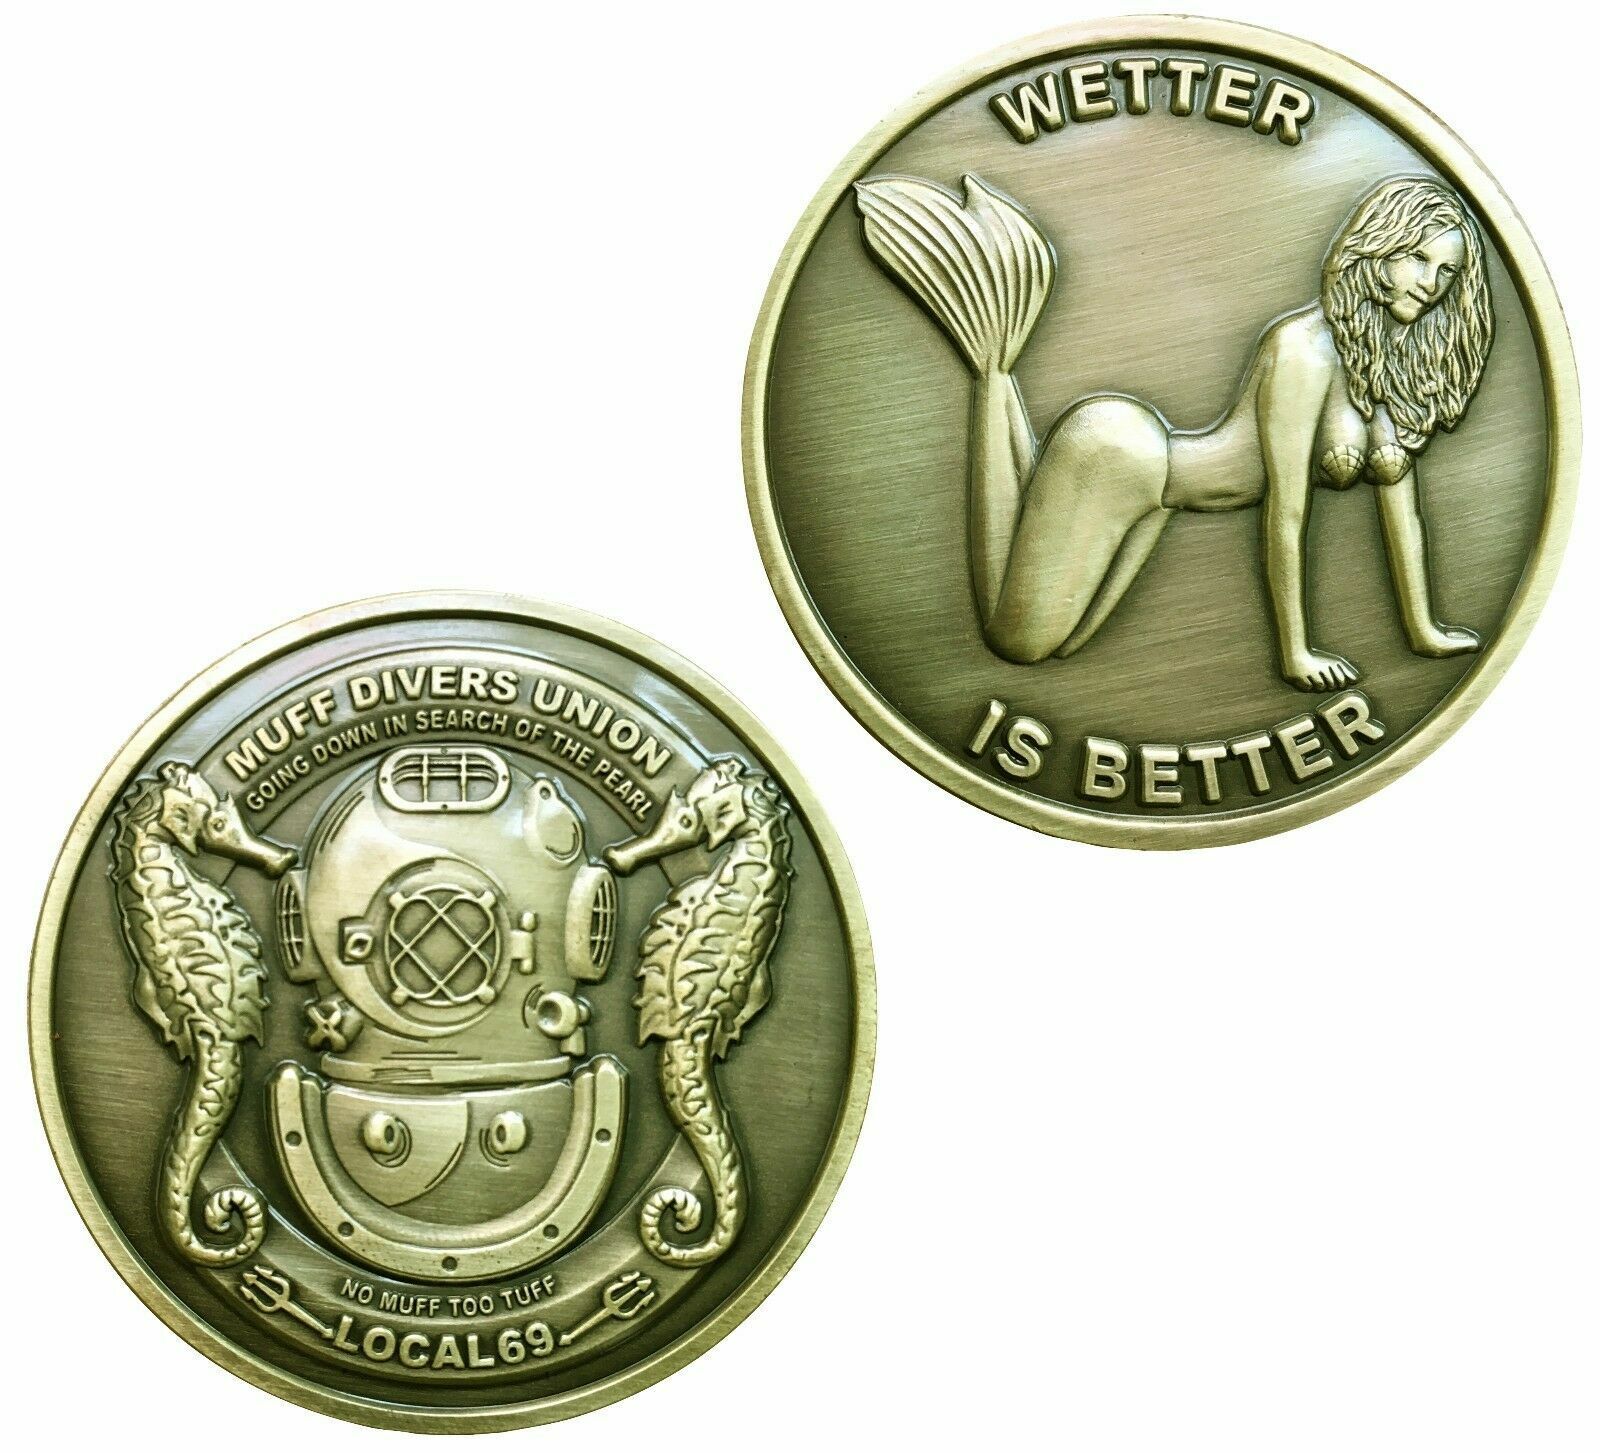 Wetter is Better Diver SCUBA Hard Hat Challenge Coin Special Forces Navy SEAL